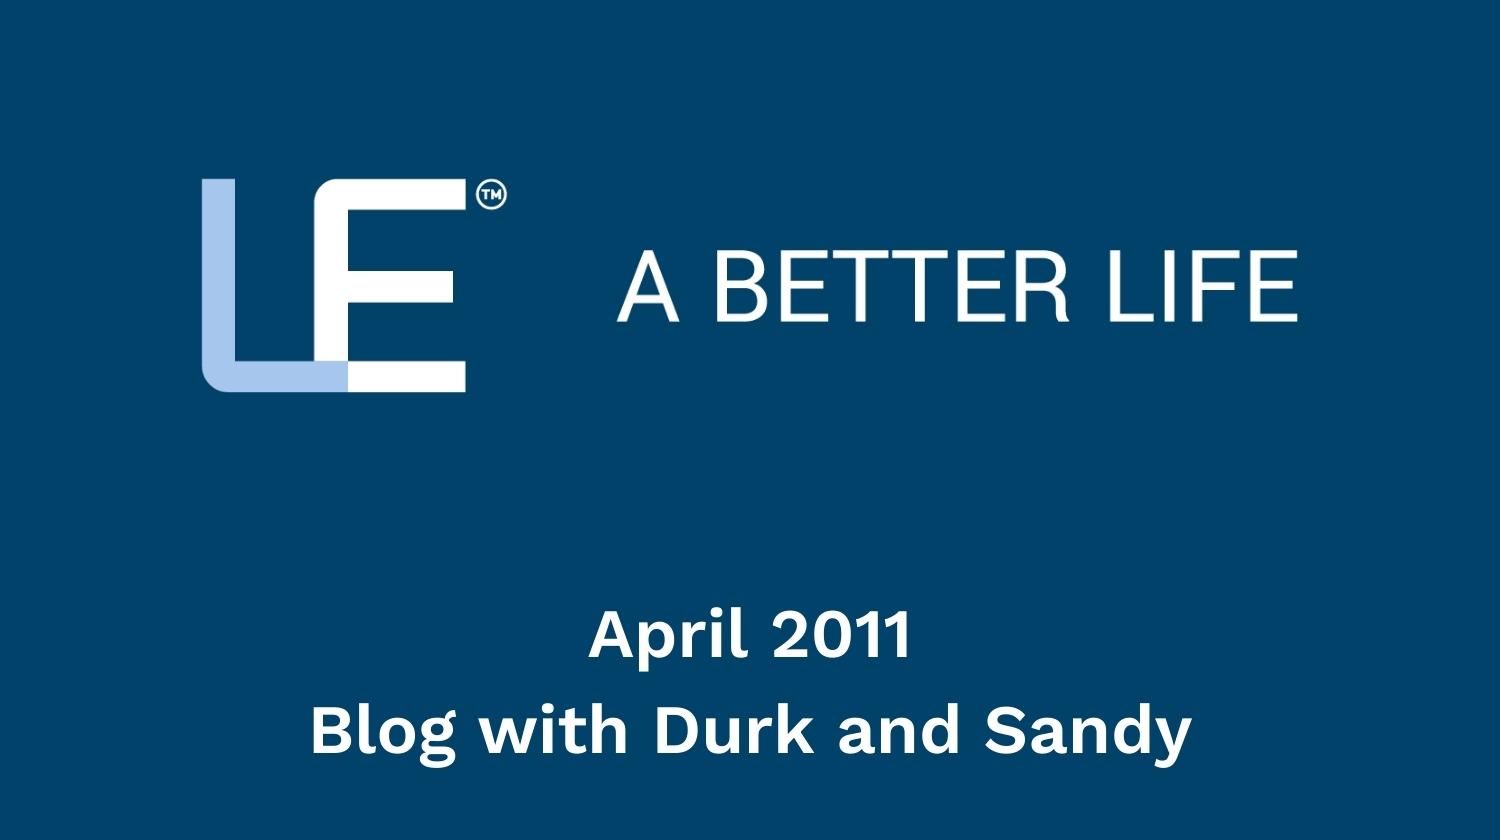 April 2011 Blog with Durk and Sandy